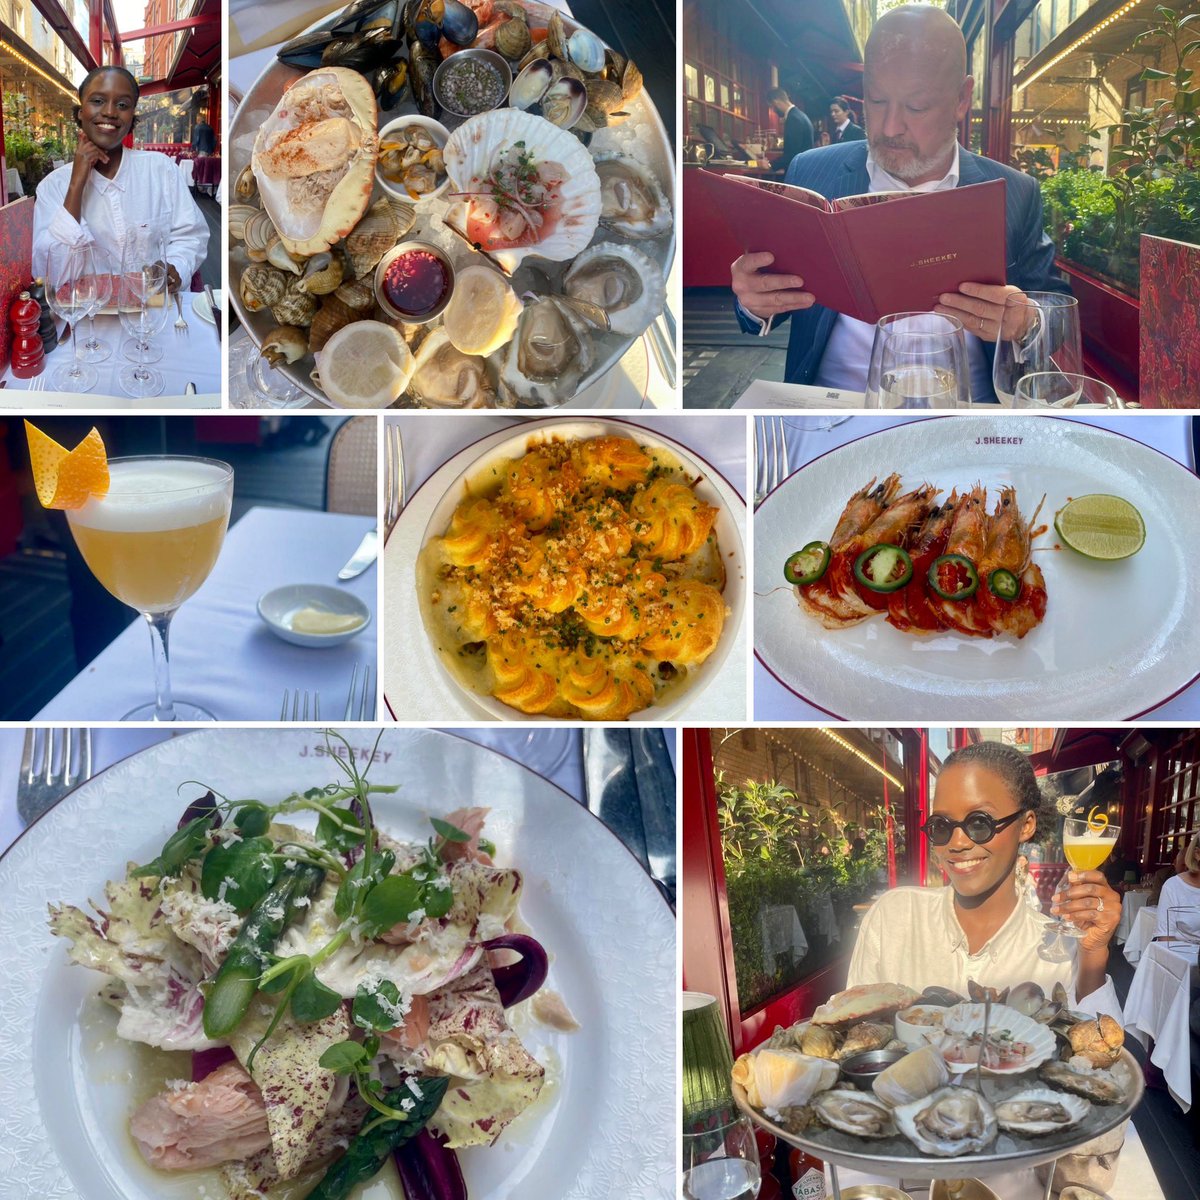 Early evening dinner in the sun at Sheekey’s, London. As you can see, I’m not as good at posing for a photo as Coco - I’m too busy ordering the delicious seafood. We had something to celebrate so a special treat.